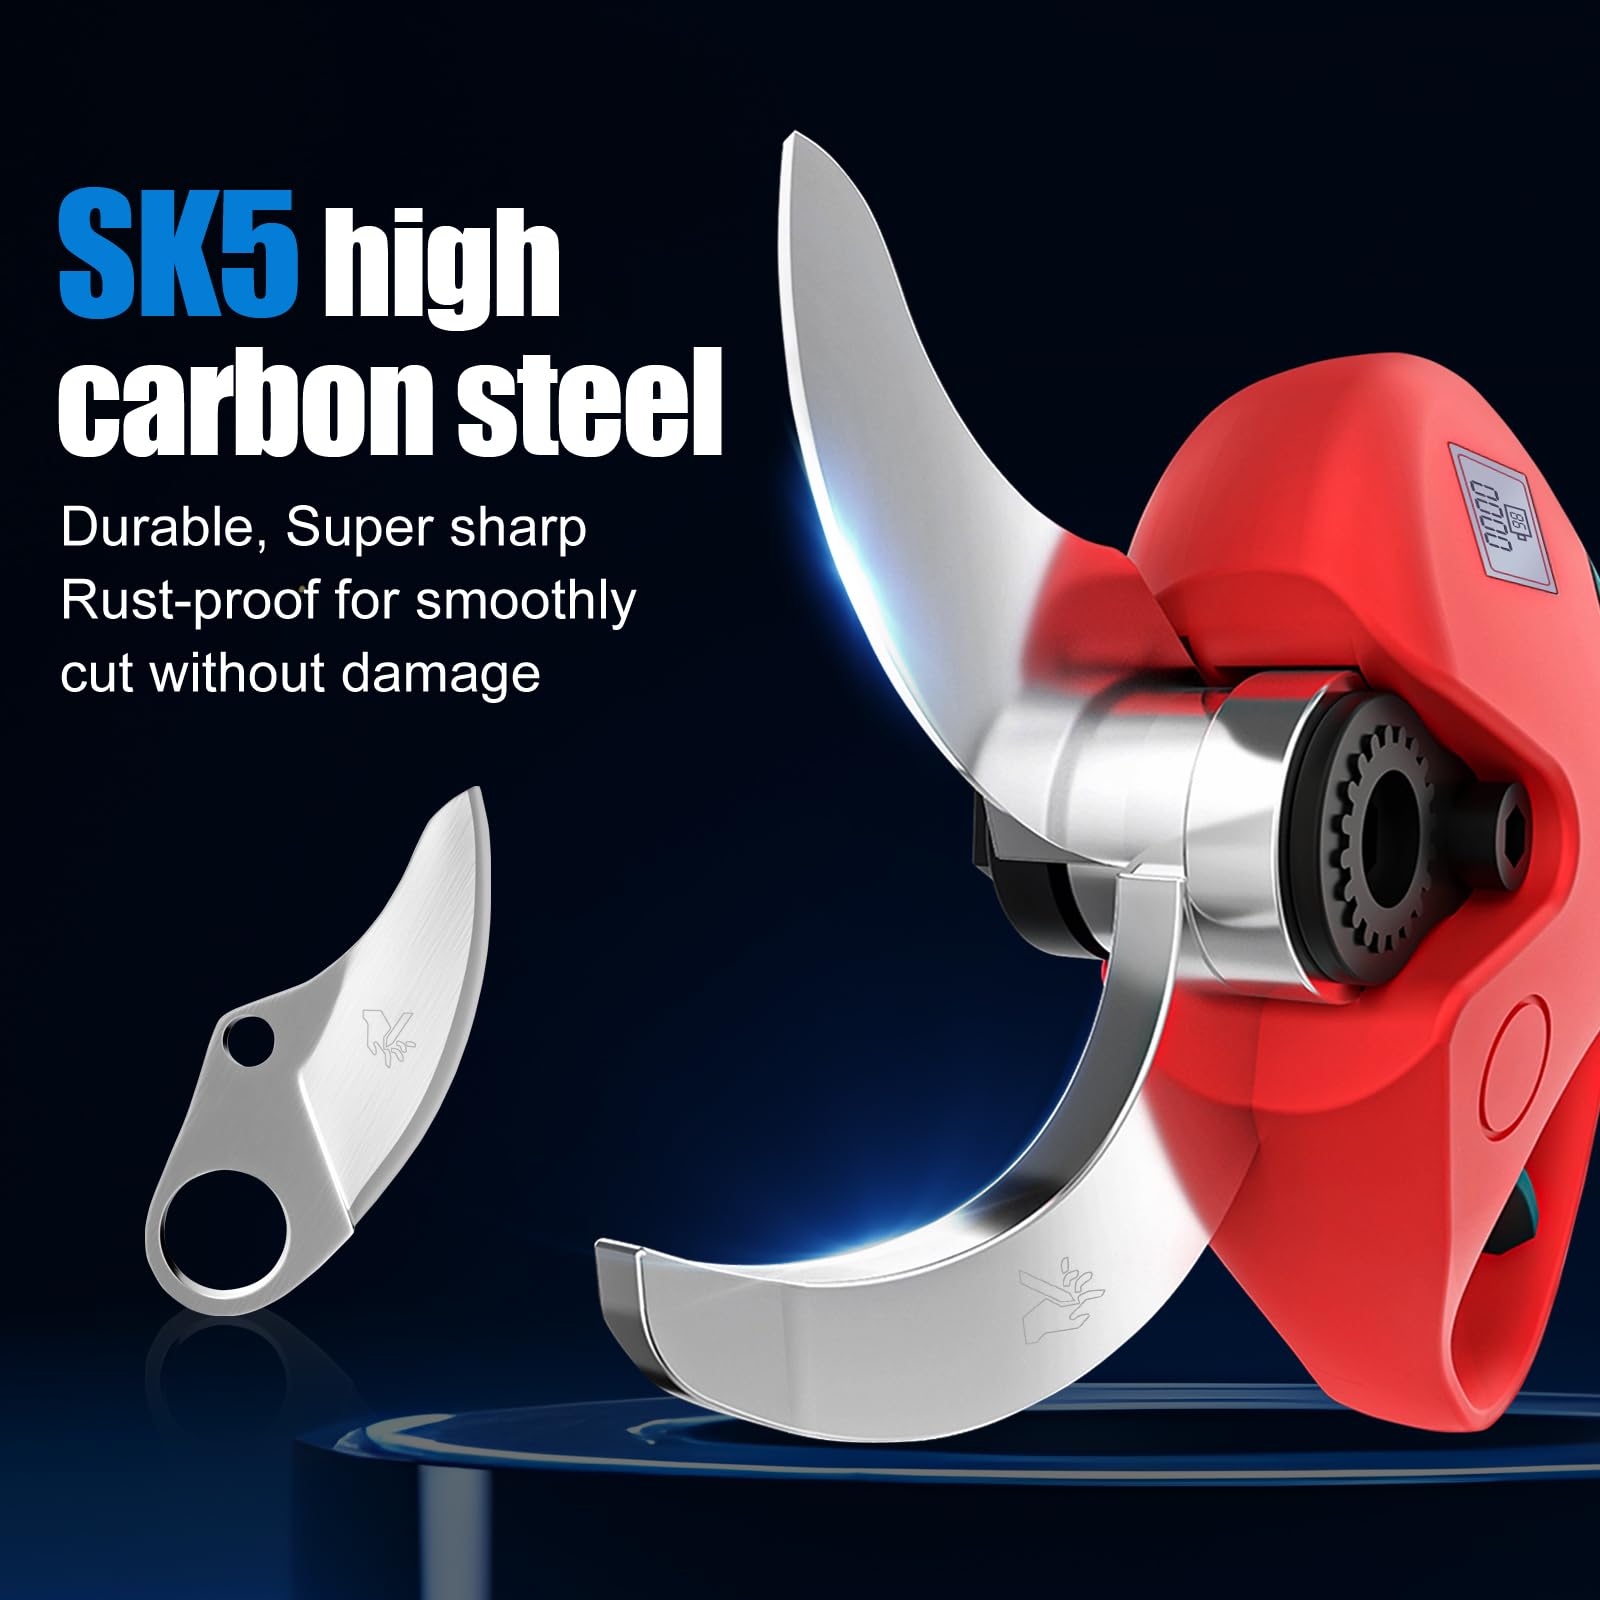 SK5 high carbon steel Durable, Super sharpRust-proof for smoothly cut without damage